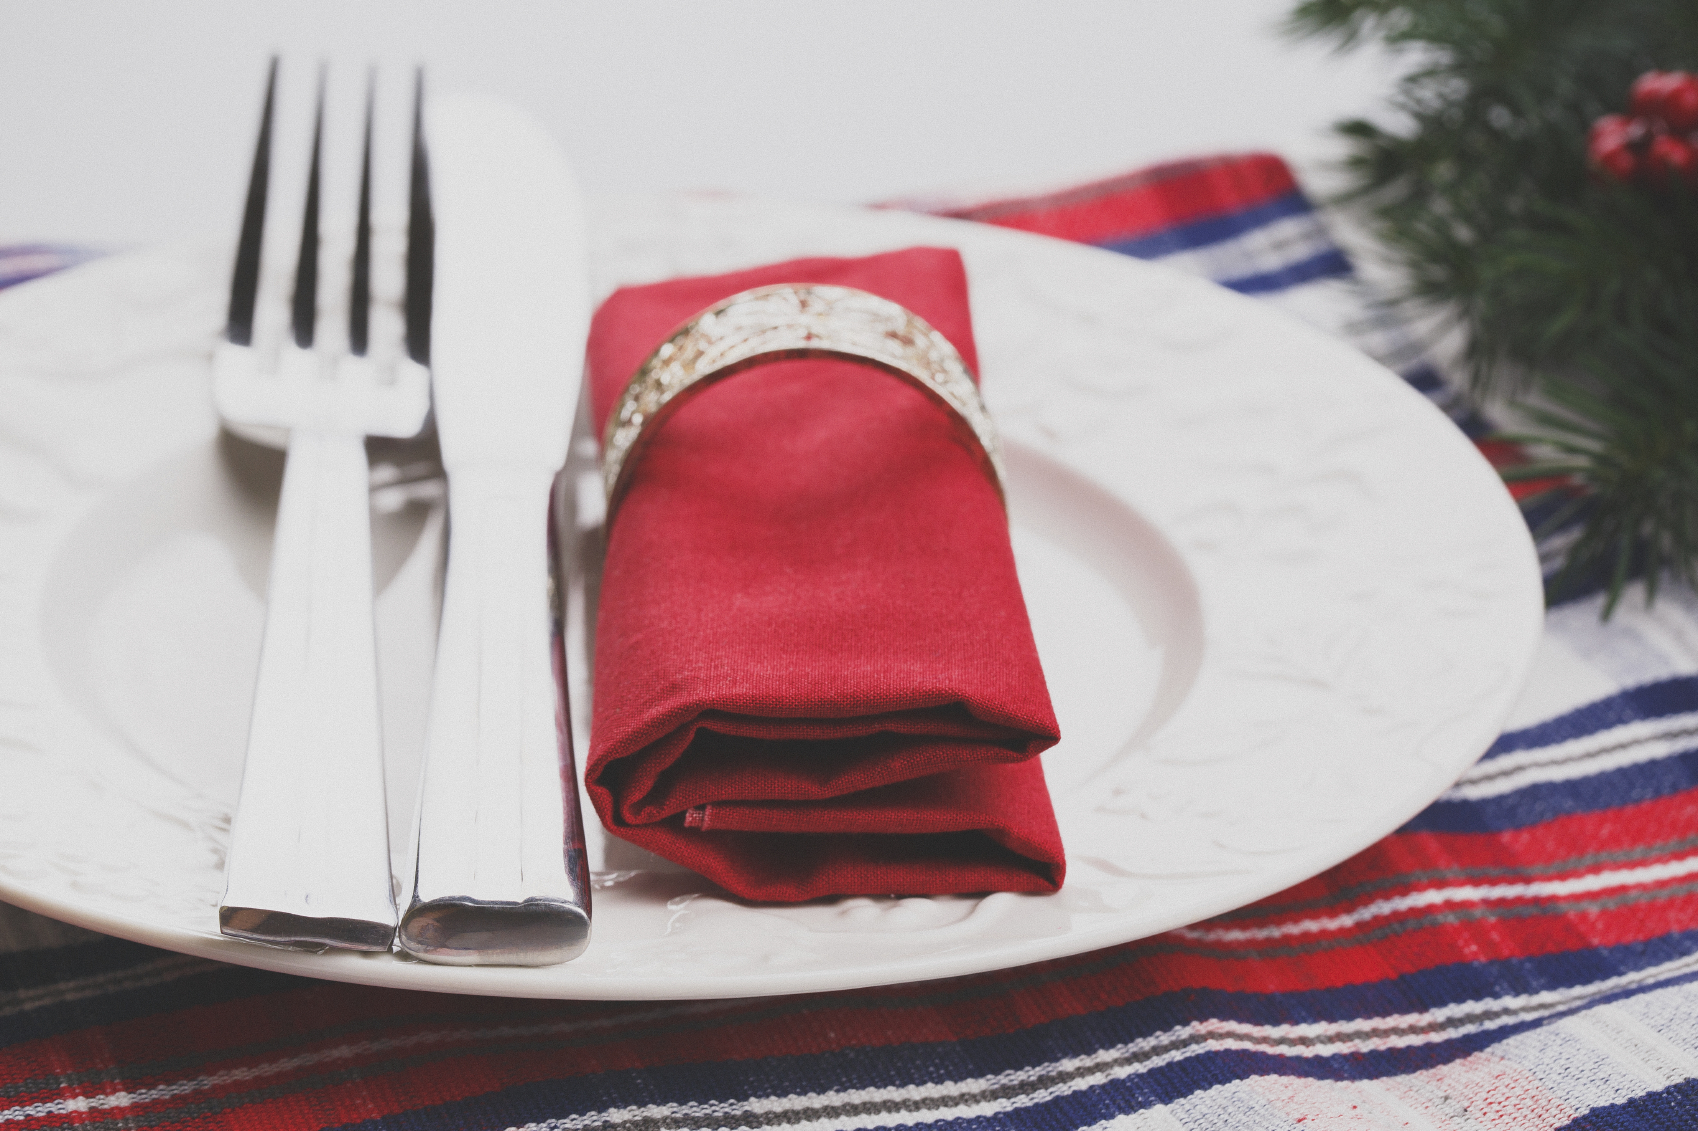 Table linens for the holidays and beyond